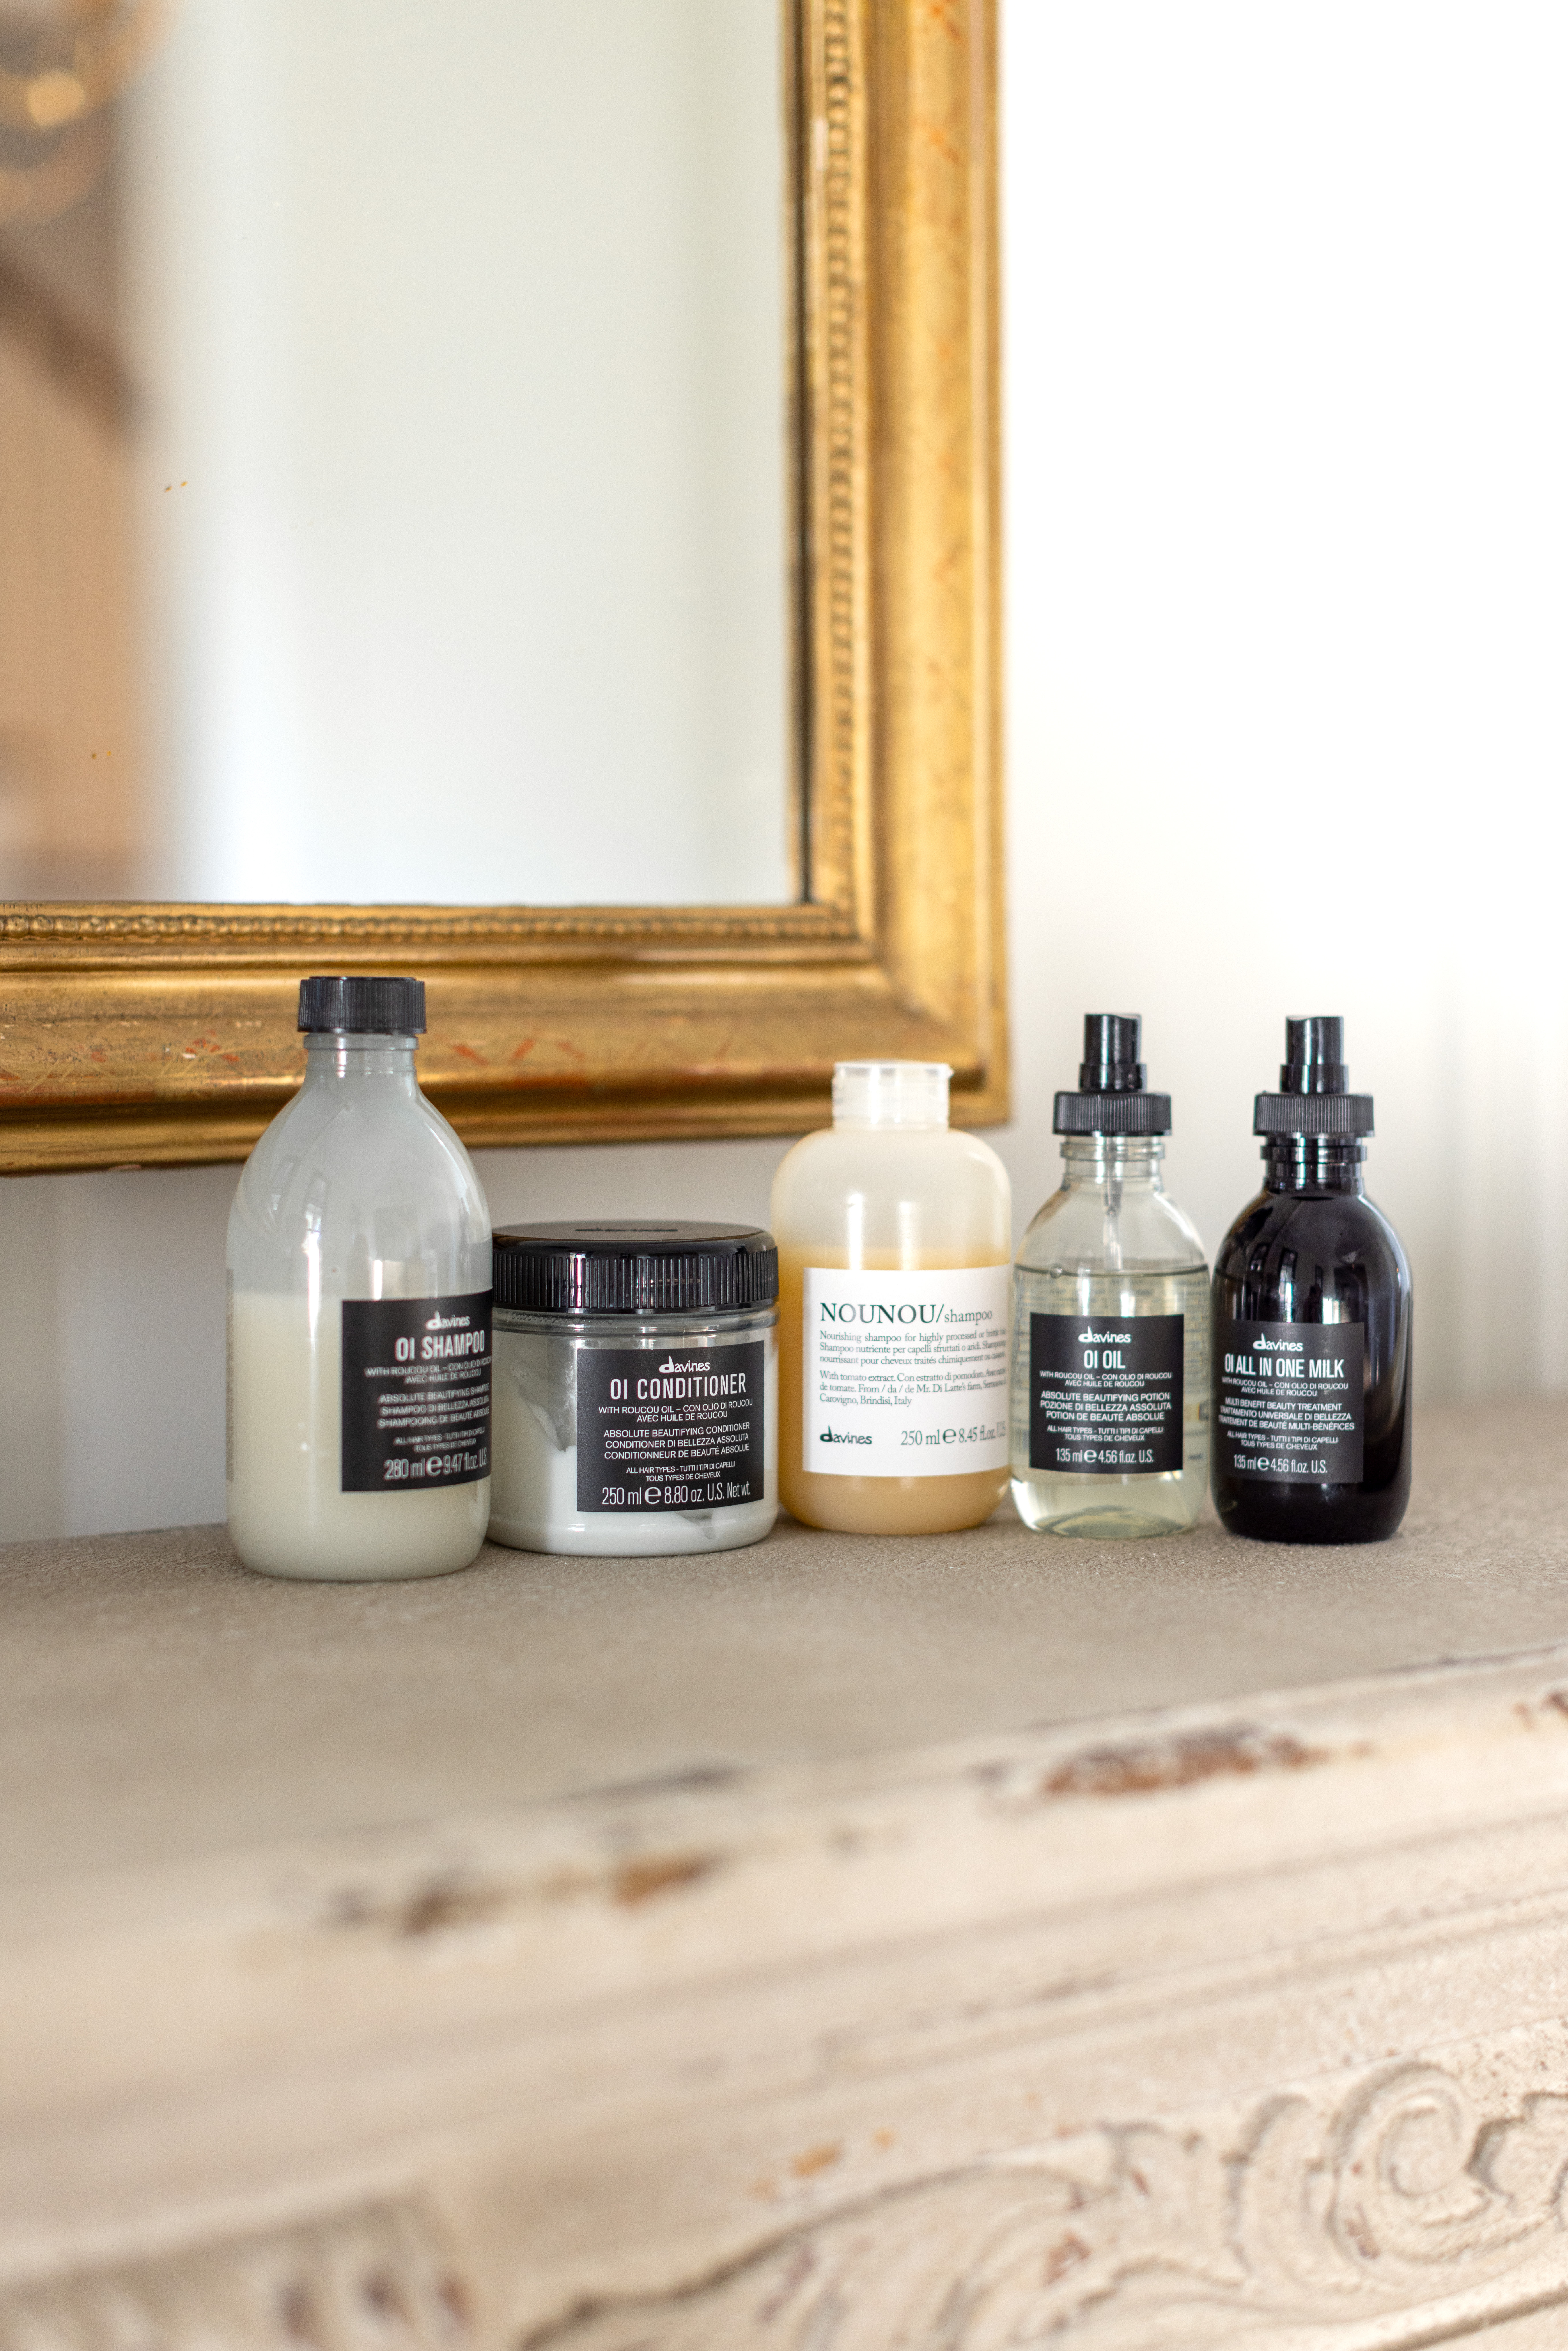 Are Davines Products Good?